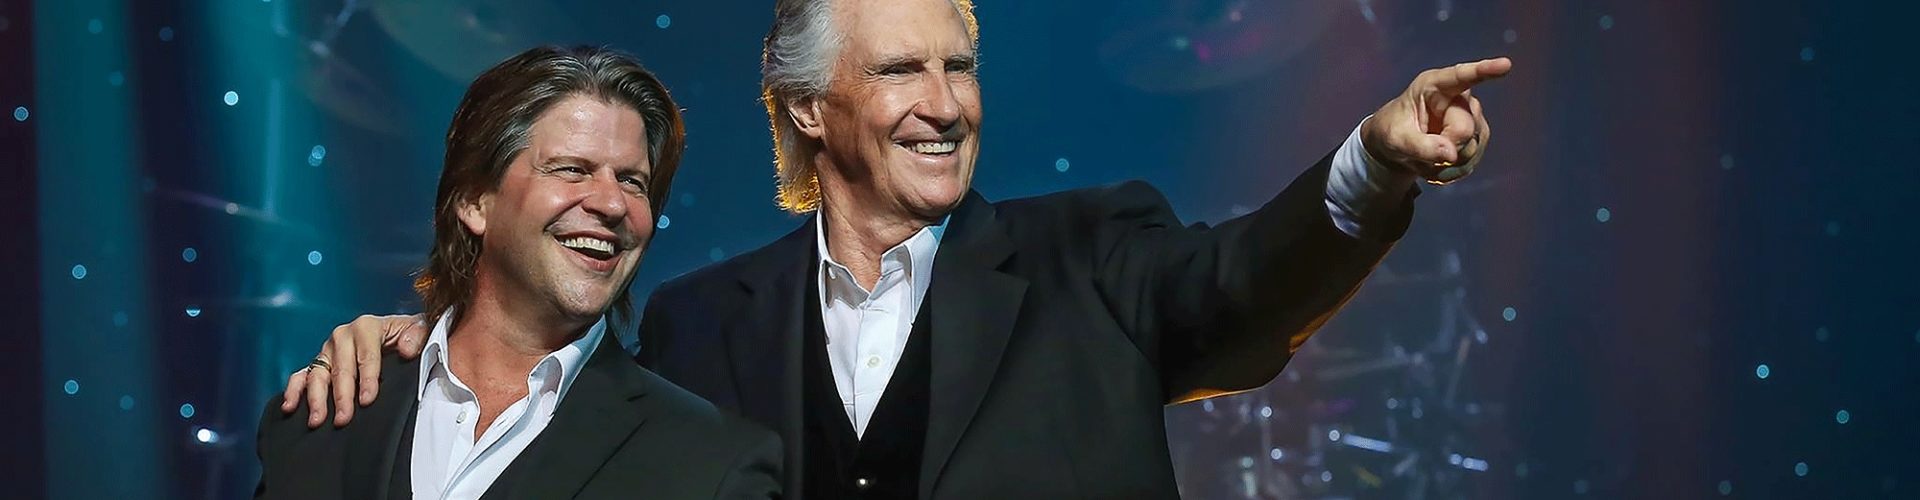 The Righteous Brothers Bill Medley & Bucky Heard